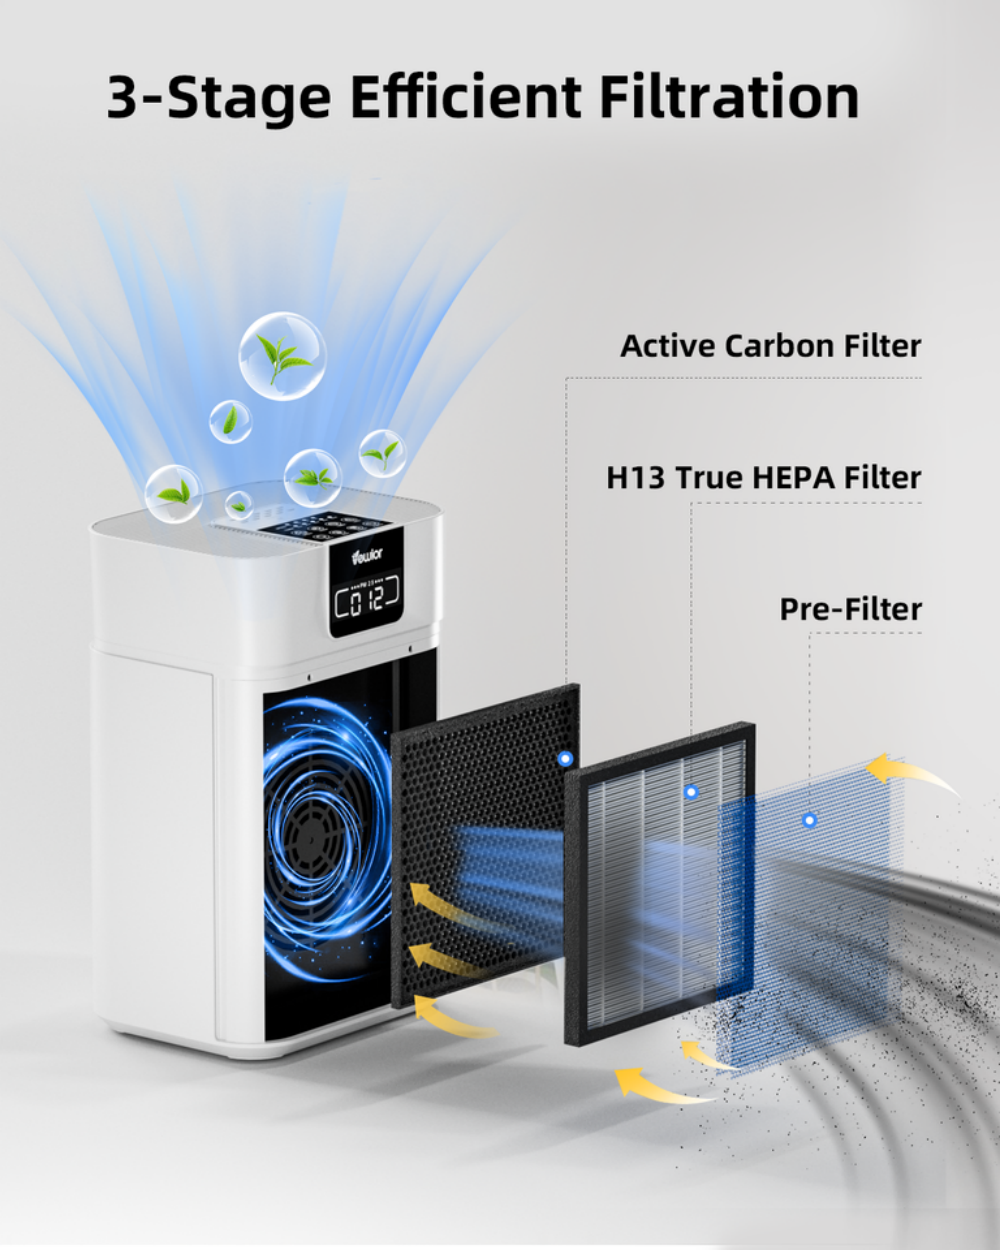 Air Purifiers Up To 1730 sq. ft H13 HEPA Air Cleaner For Pets Smell Smoke Pollen